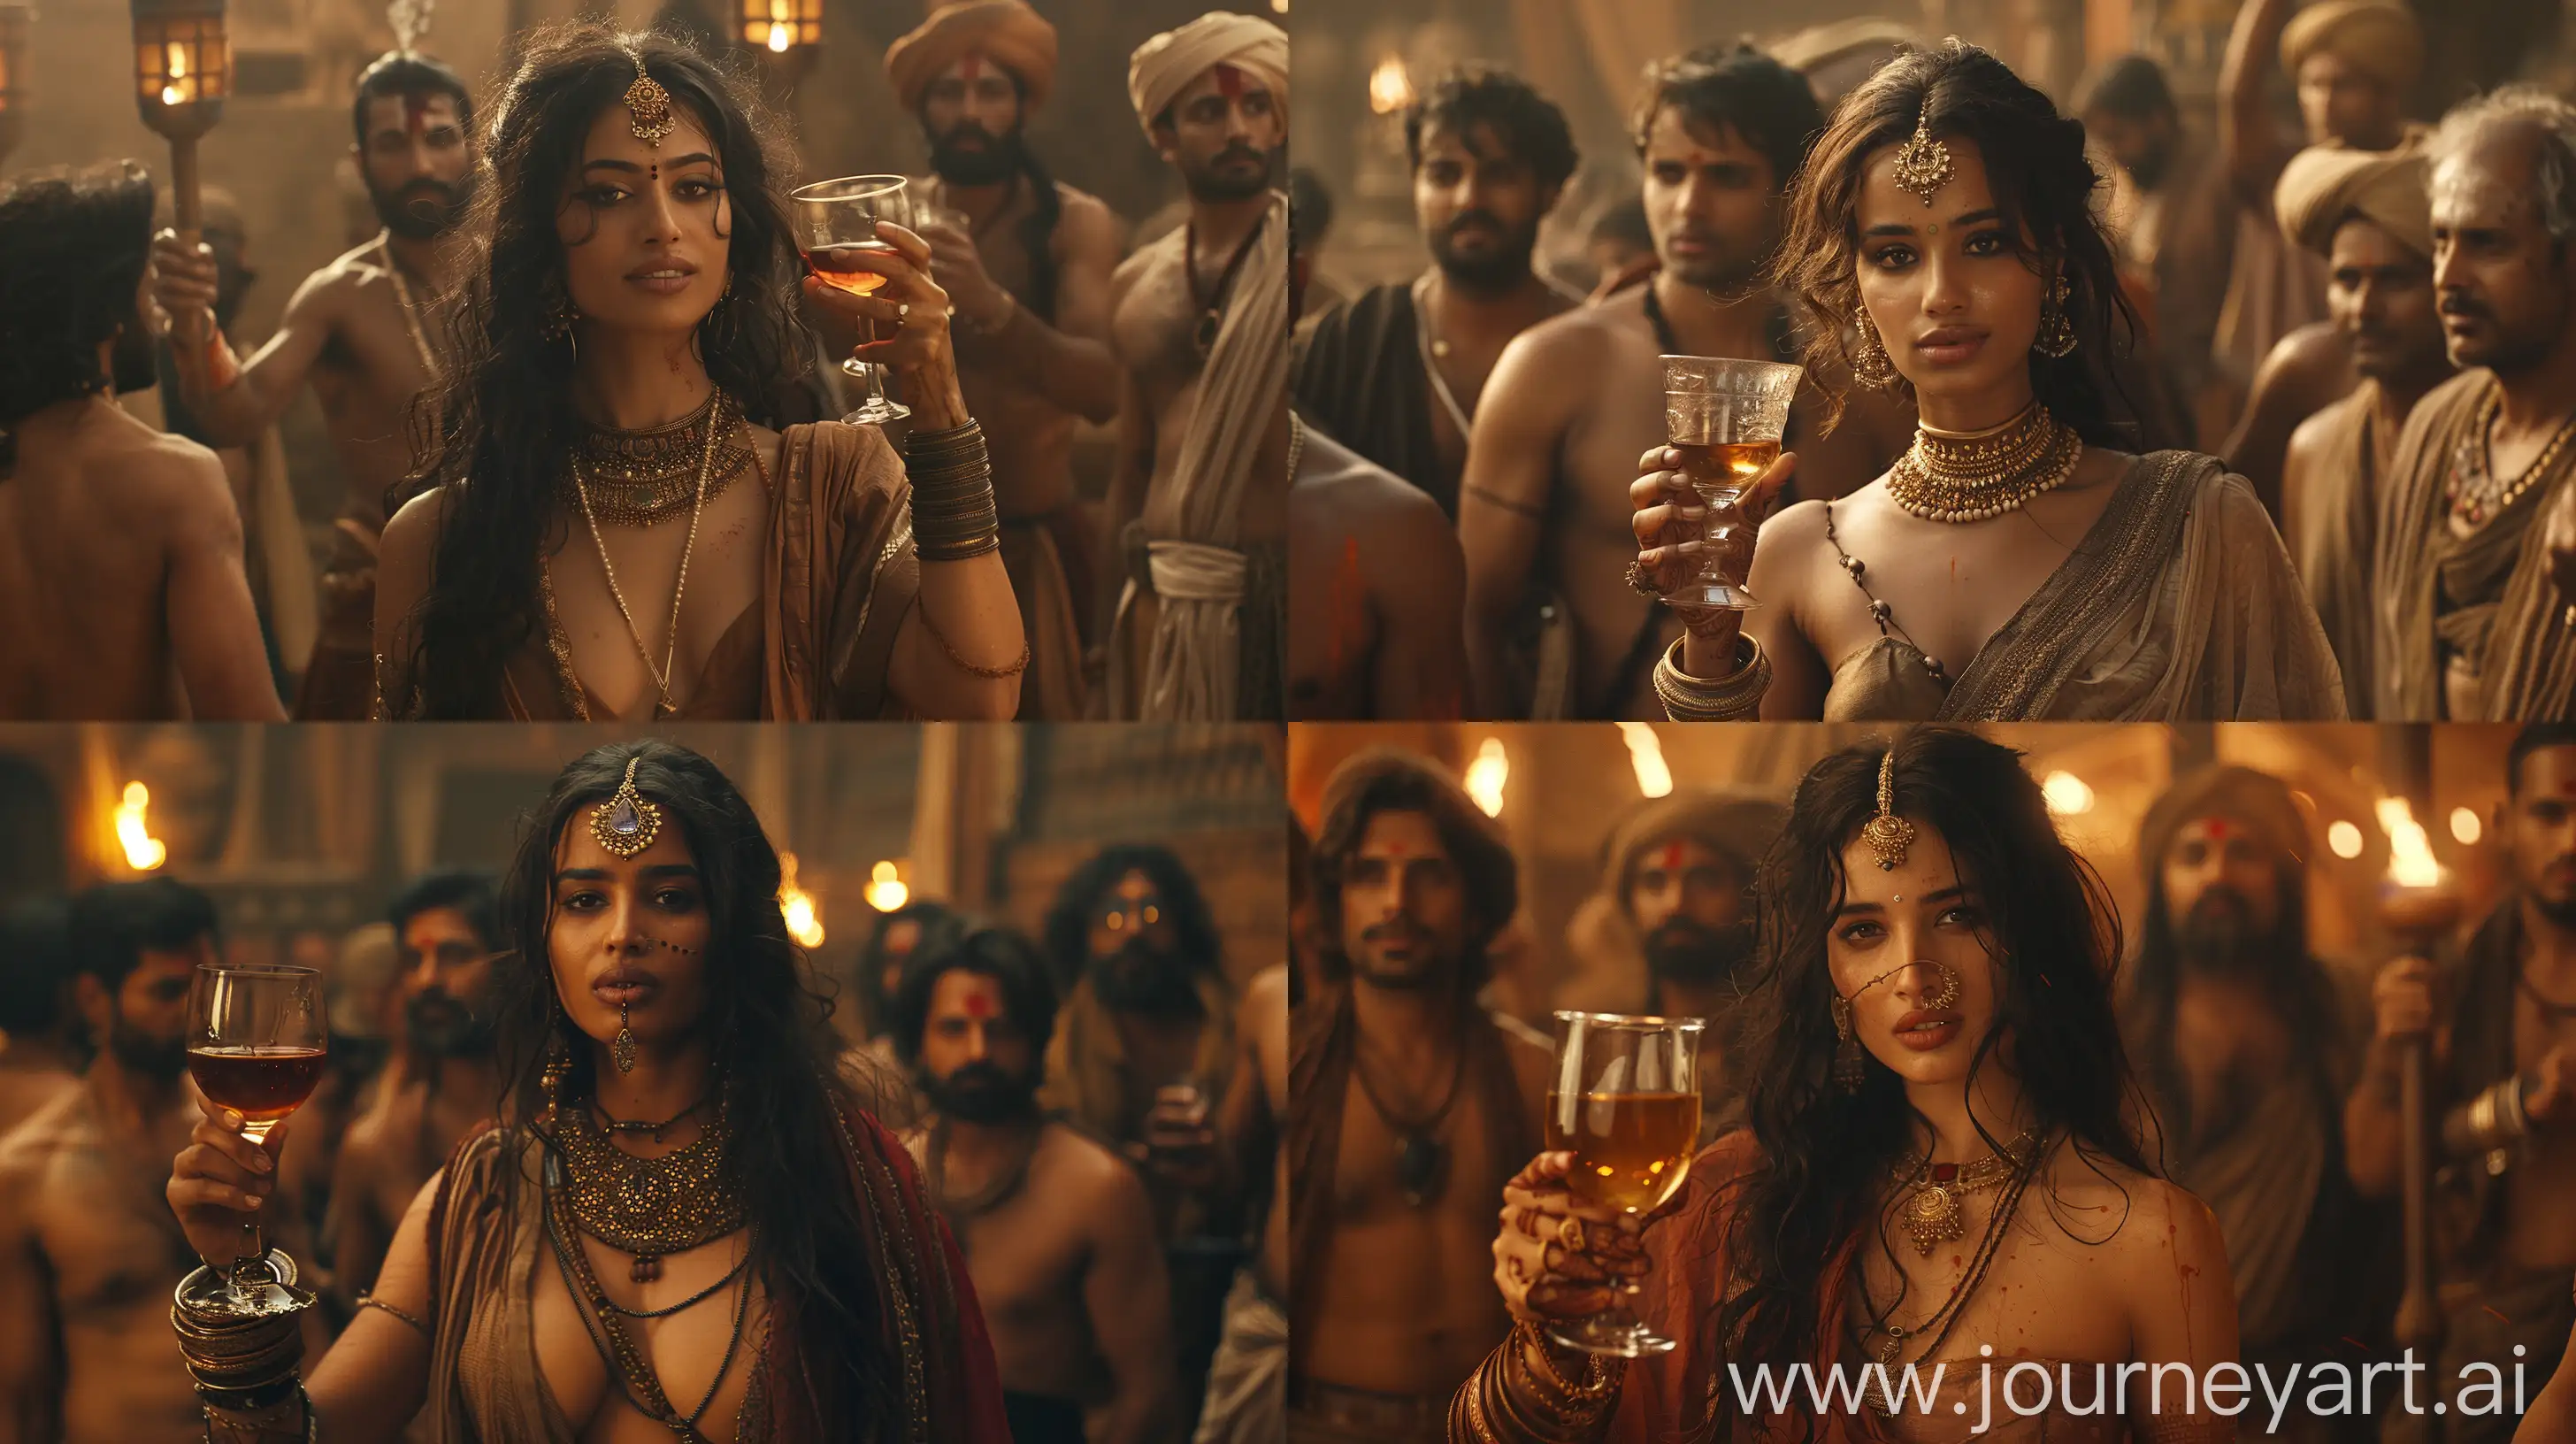 Ancient-Indian-Woman-Drinking-Wine-Surrounded-by-Men